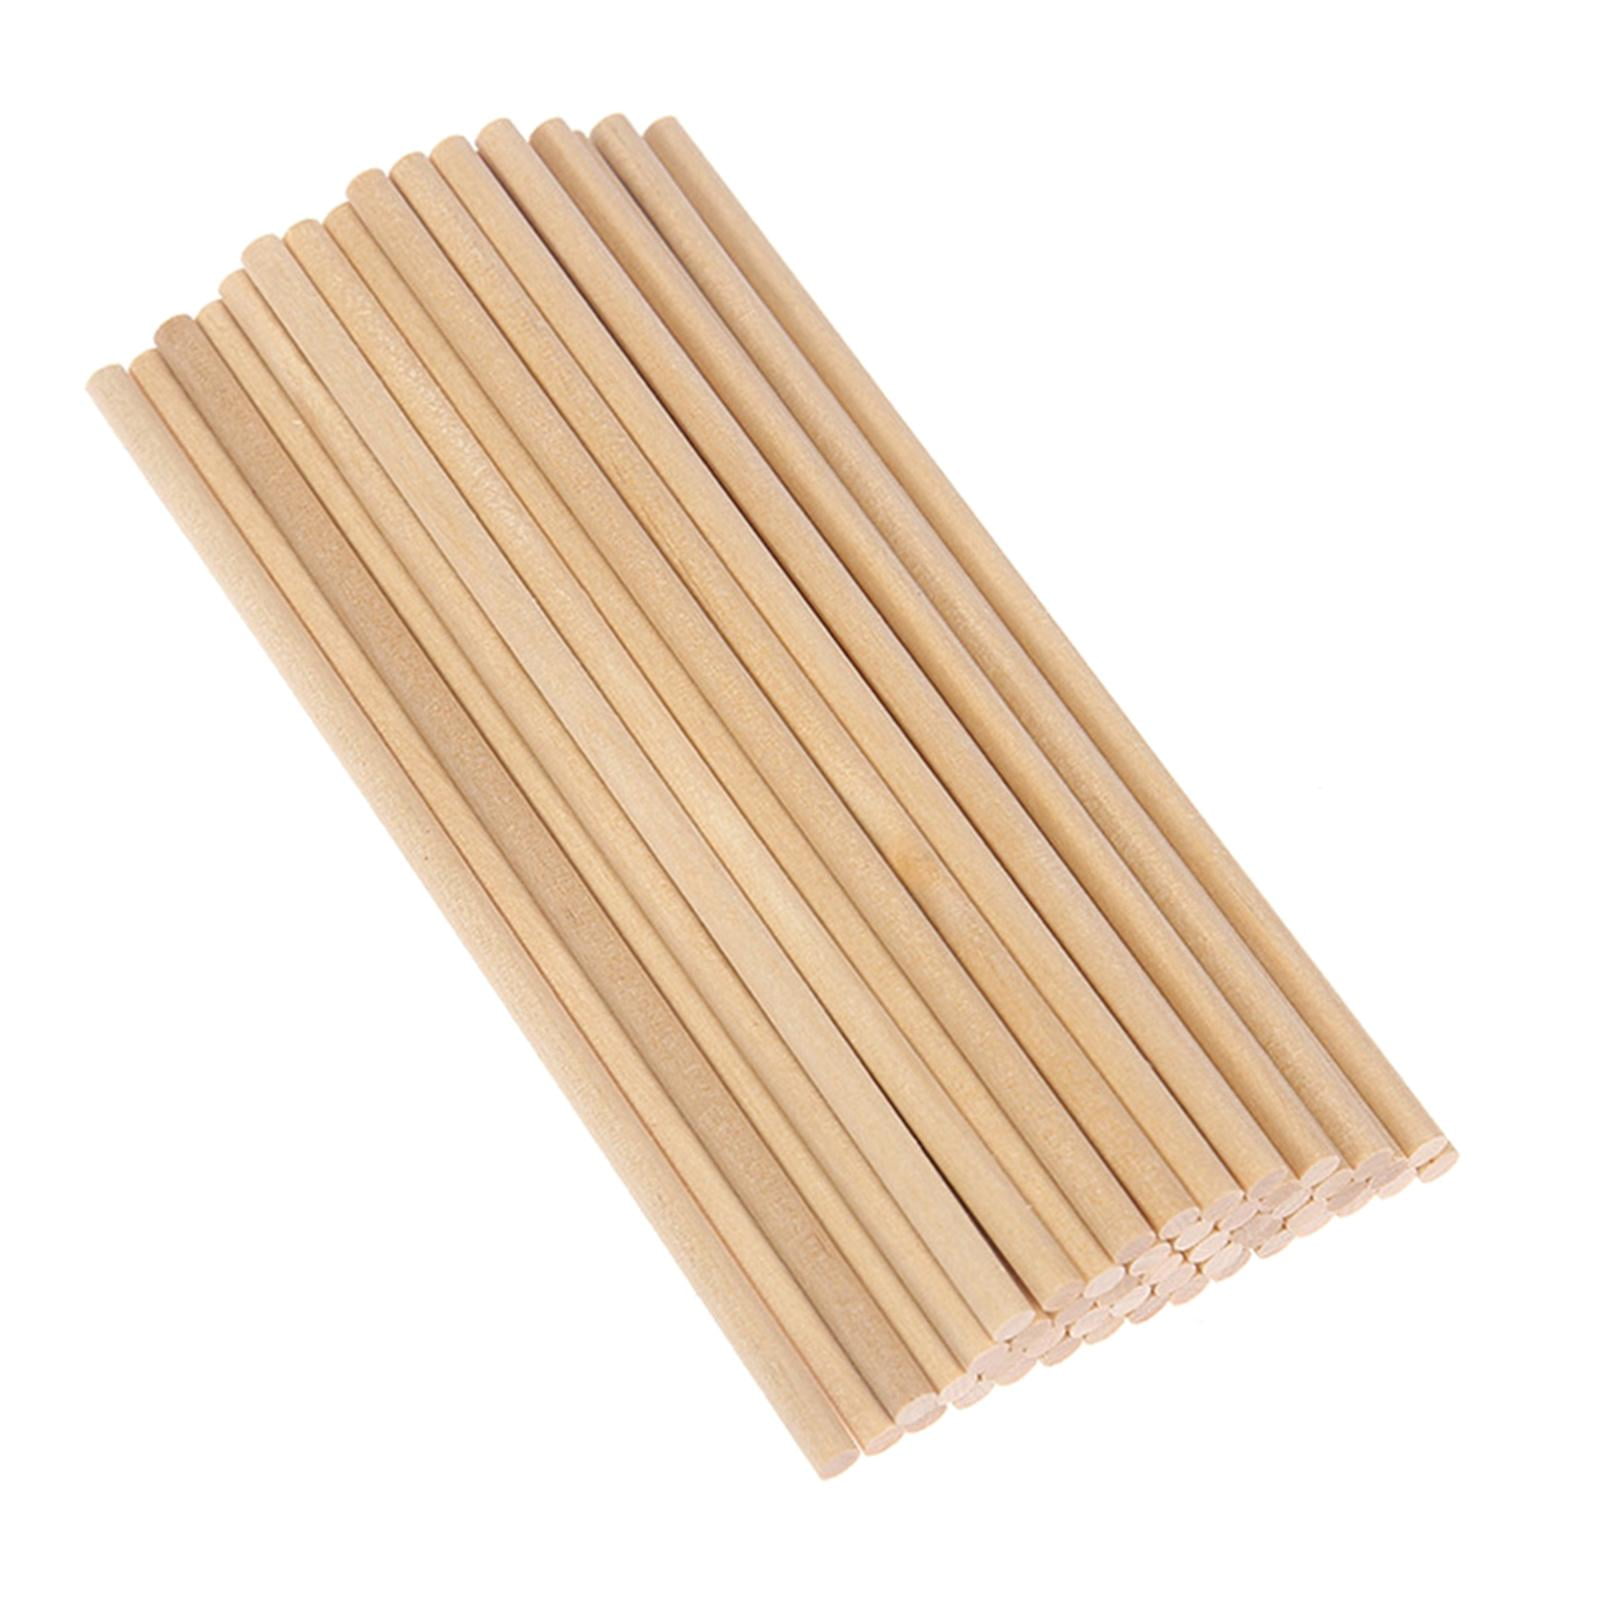 Hardwood Wooden Dowels Wood Craft Sticks 4 to 20mm Thick 10 to 30cm Long  Pins 10 Pack 